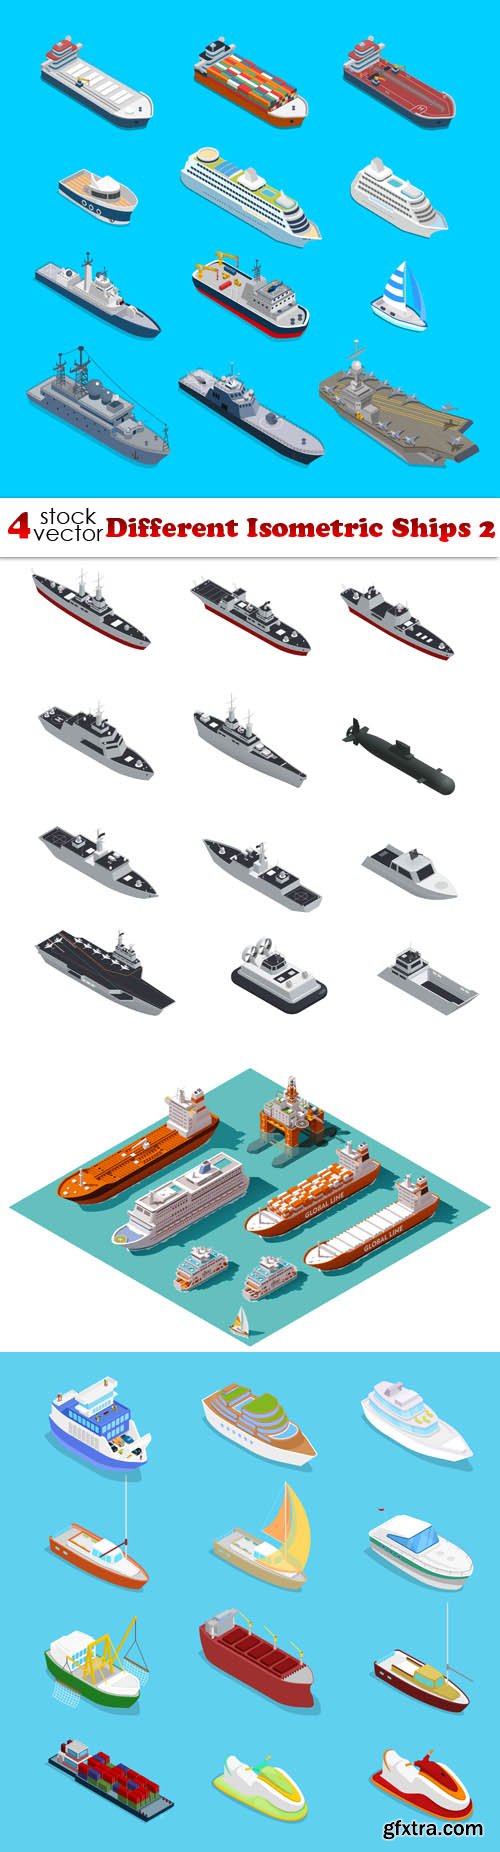 Vectors - Different Isometric Ships 2